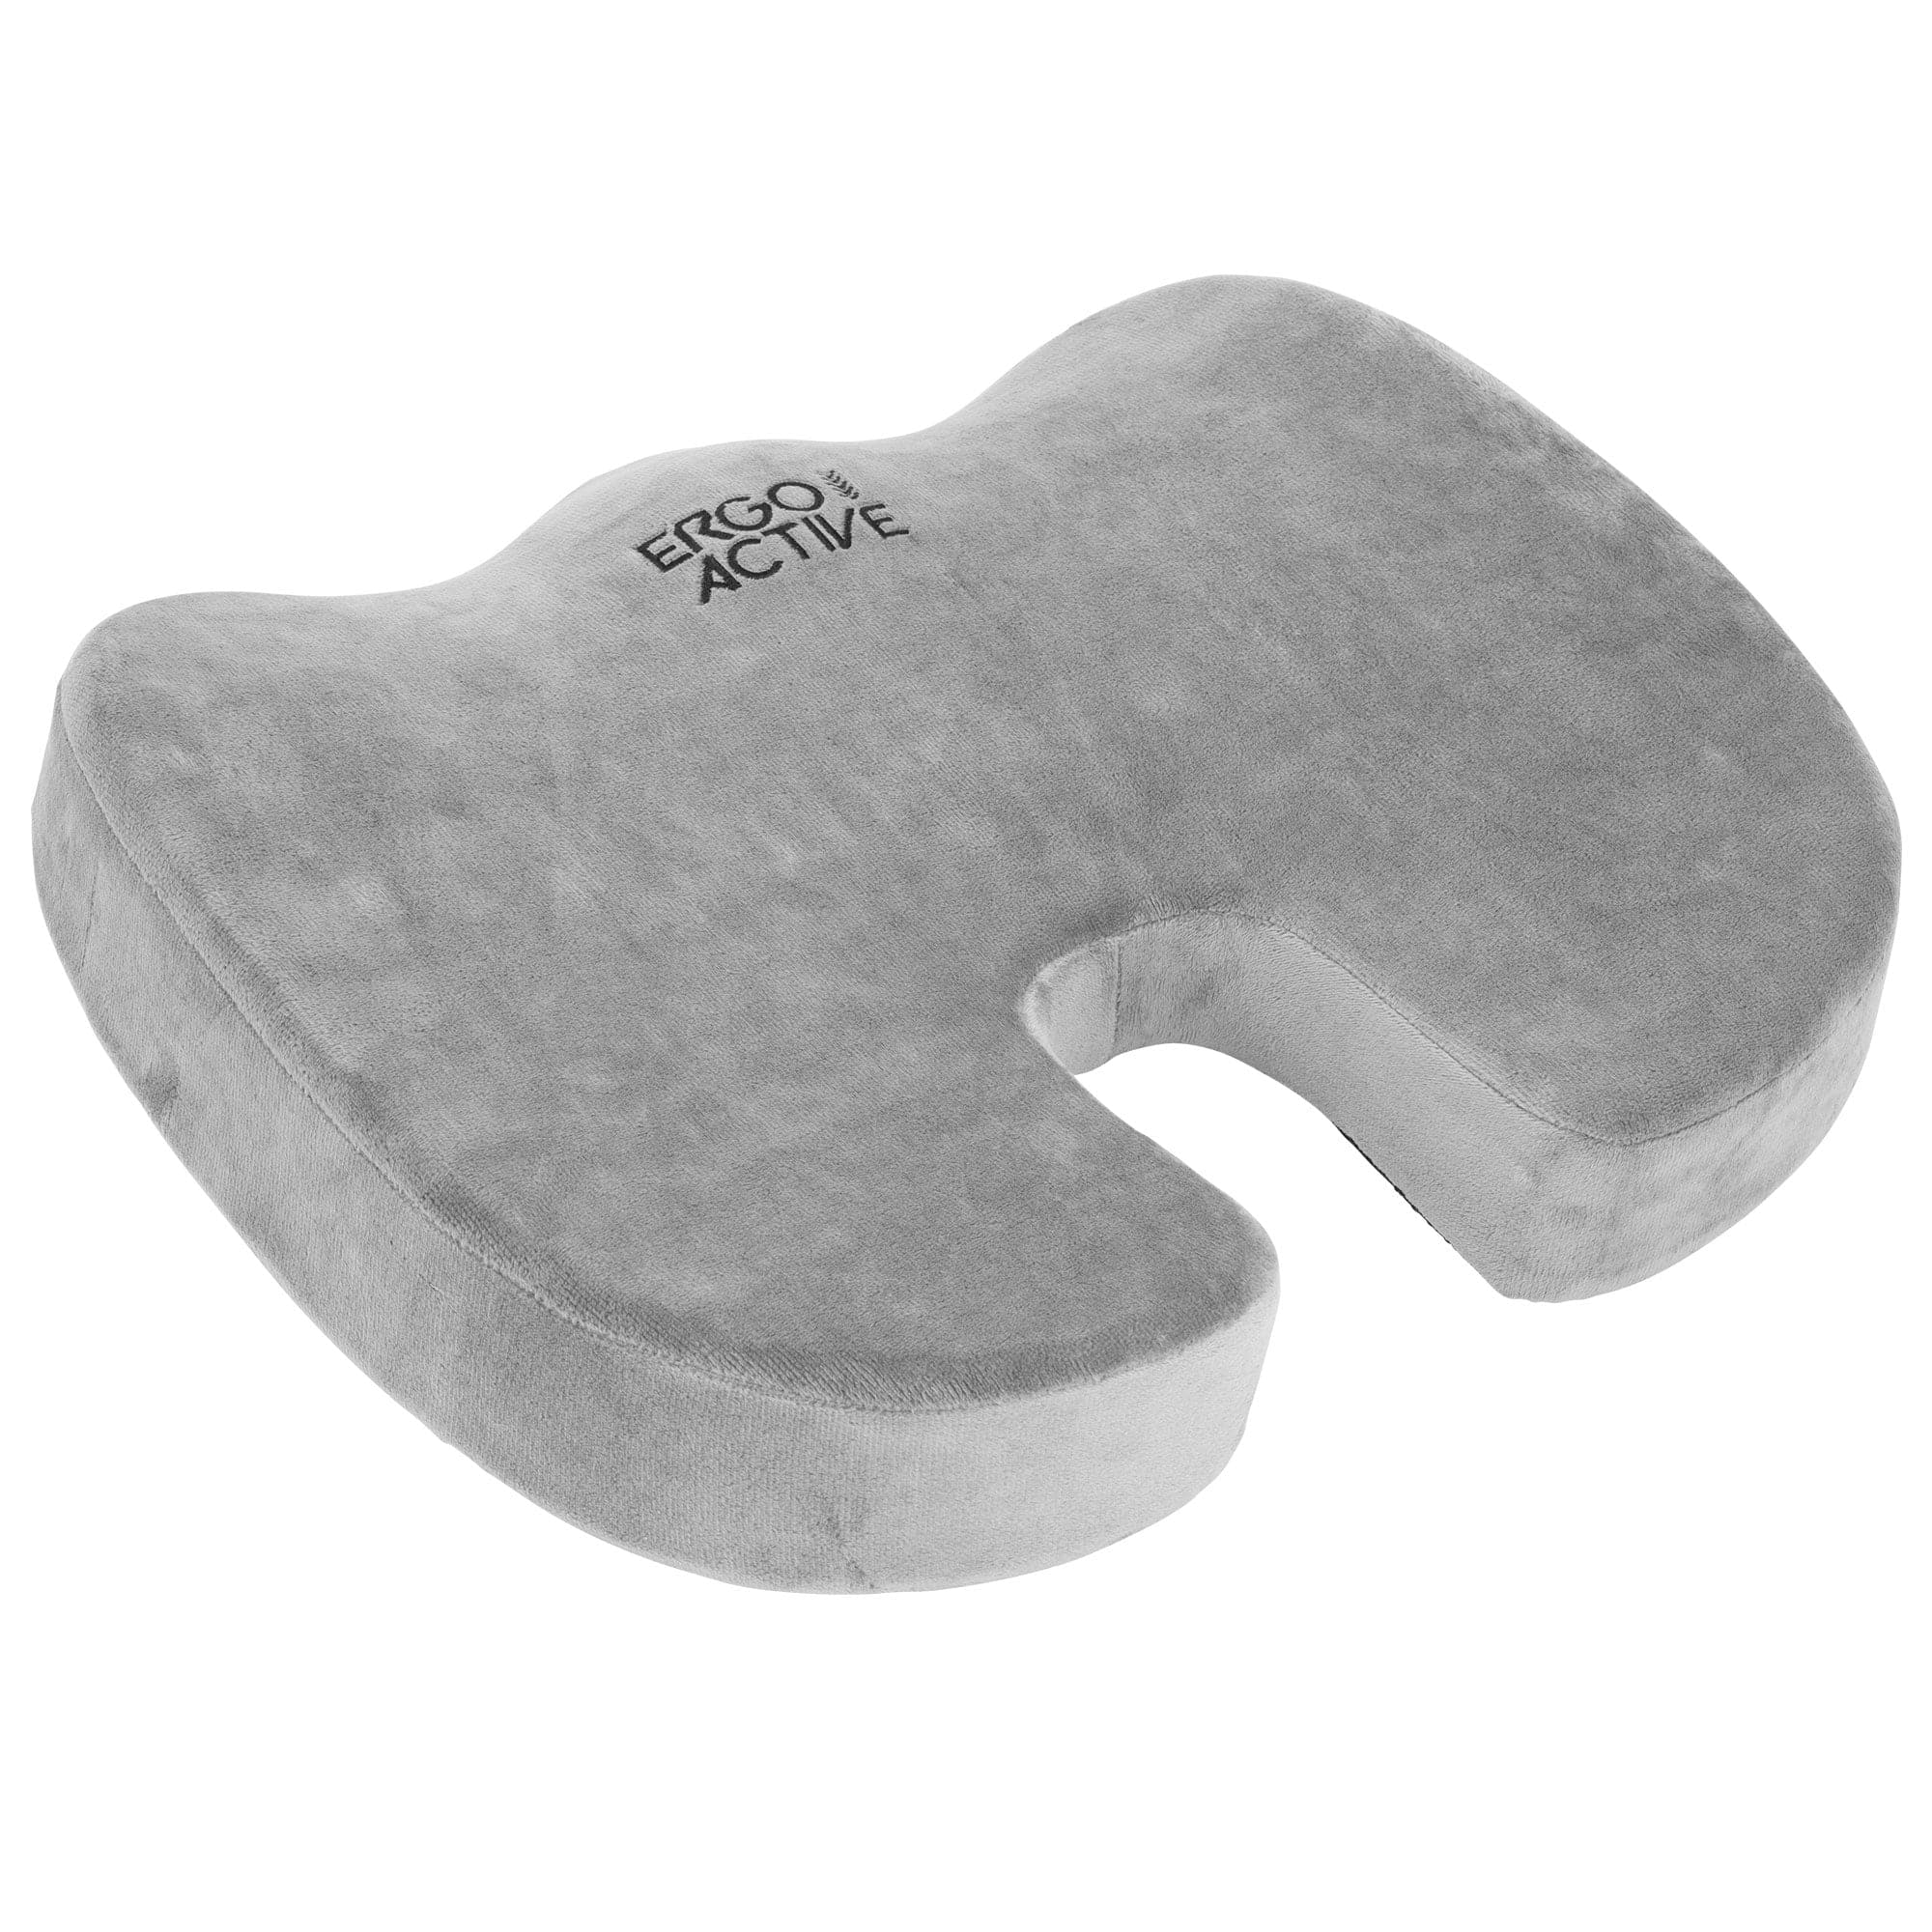 TYPE S Go Seat Cushion with Comfort Foam